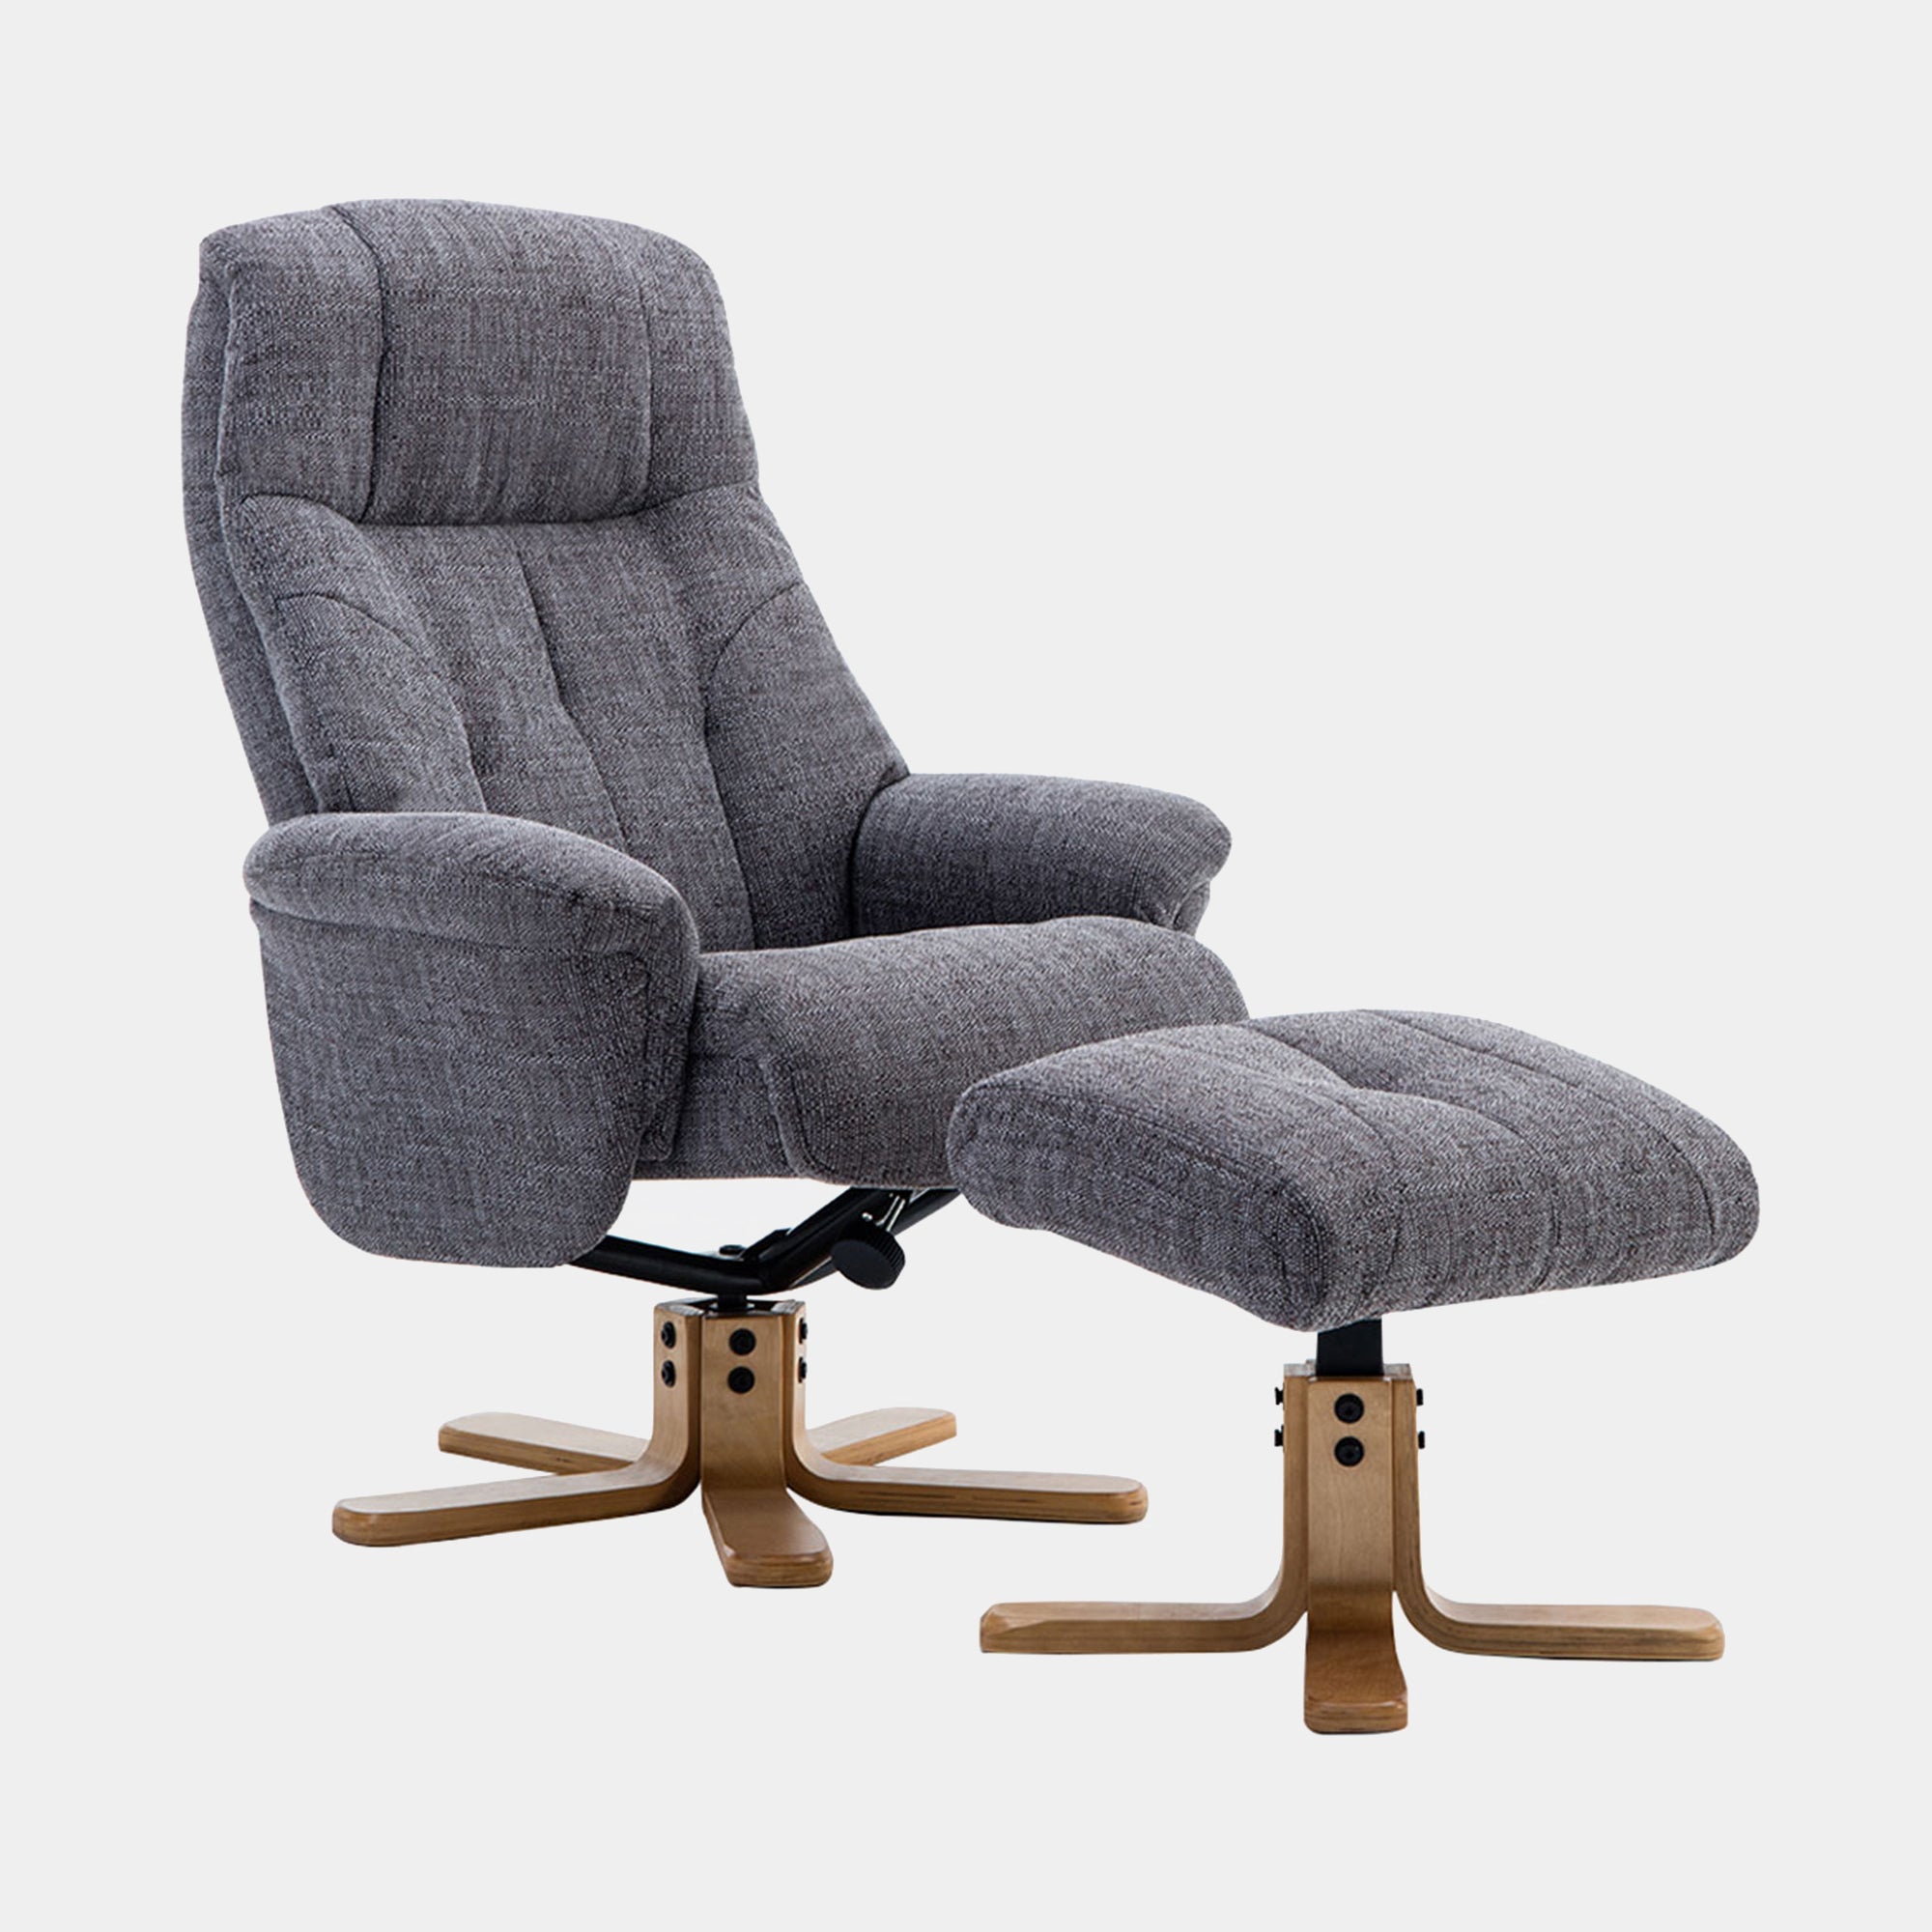 Swivel Chair And Stool In Lisbon Grey Fabric (Assembly Required)